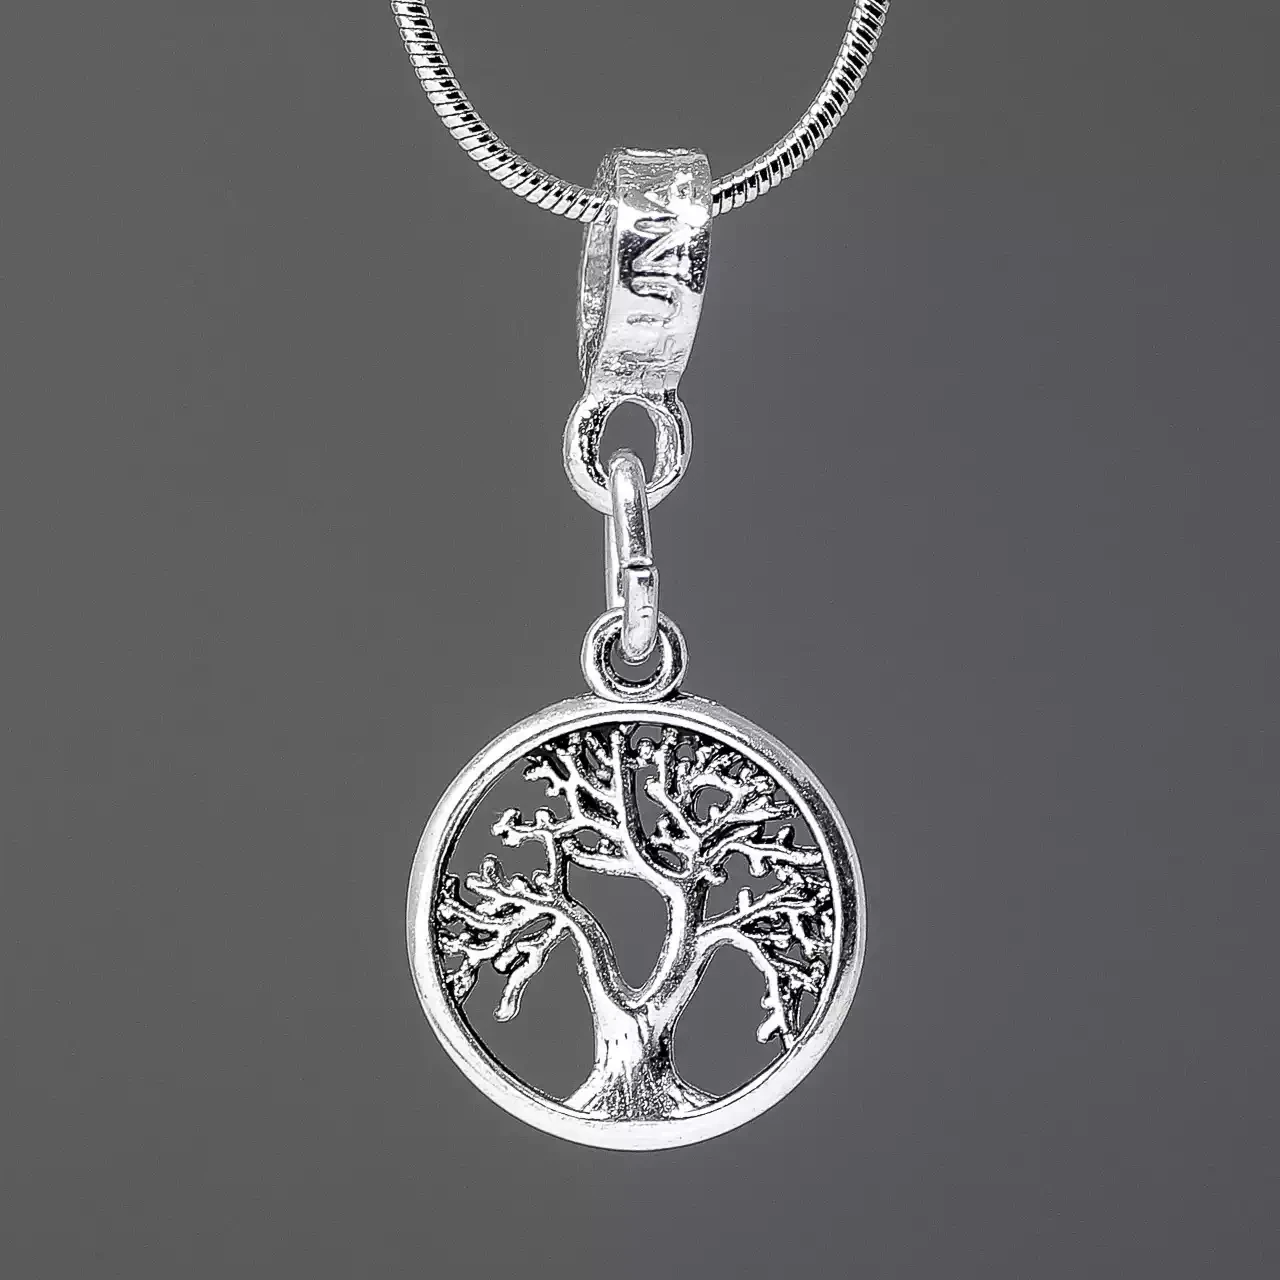 Pewter Charm Necklace - Tree of Life Round Disc by Metal Planet